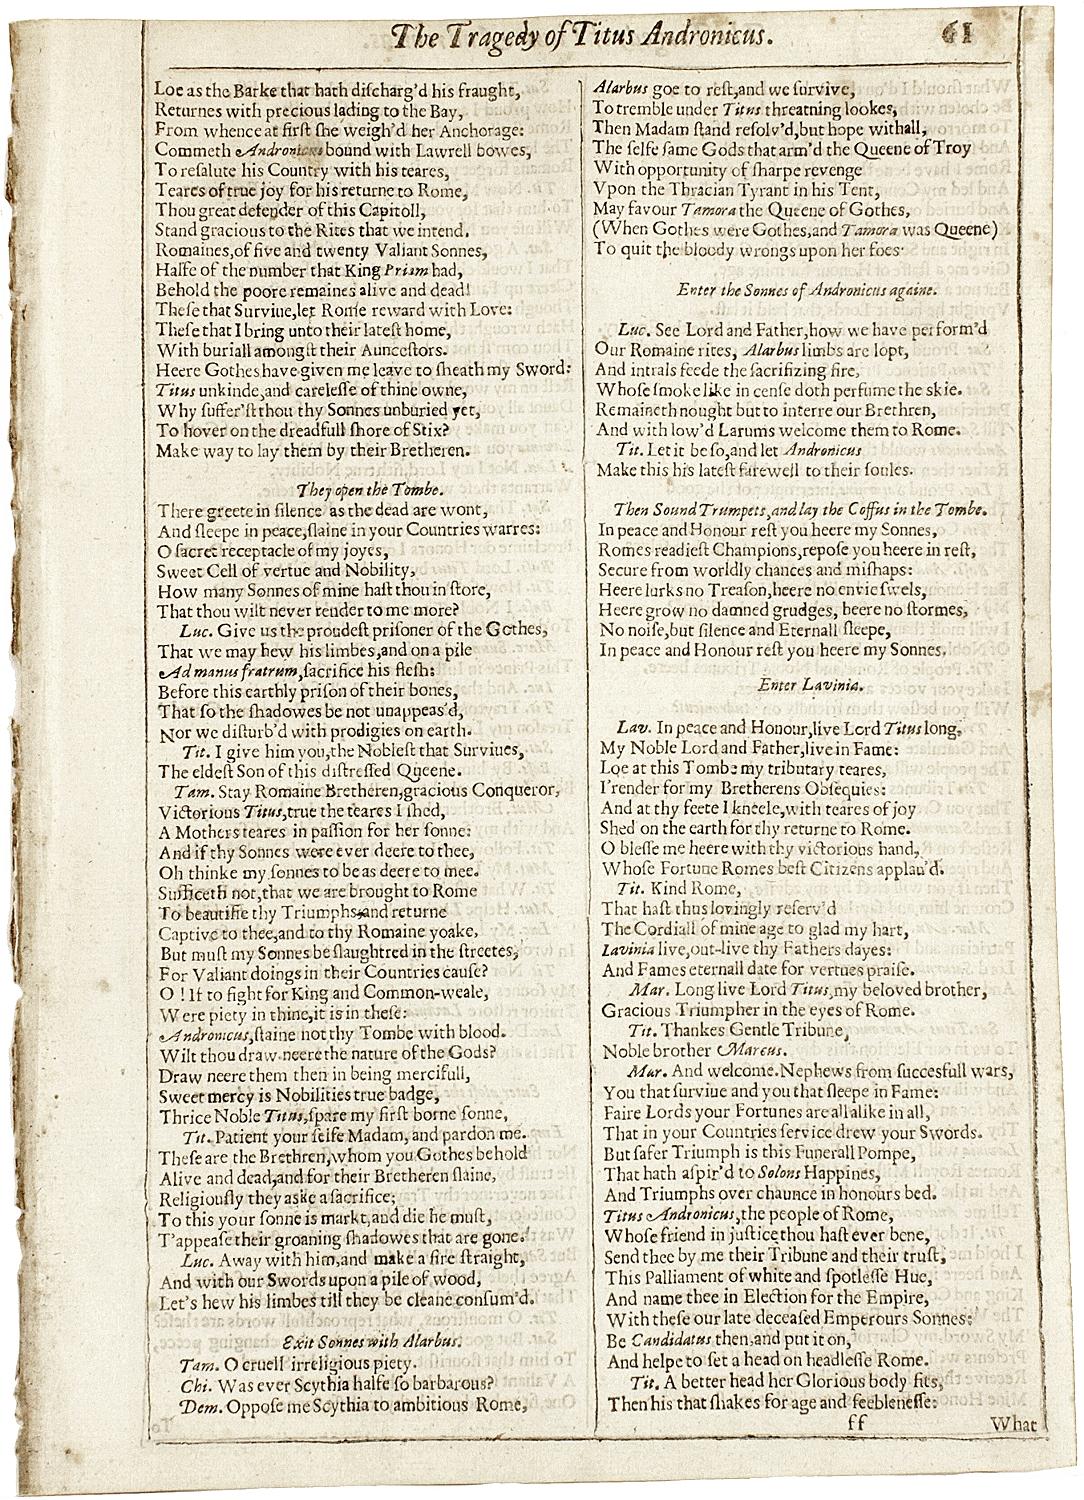 British Shakespeare. The Tragedy of Titus Andronicus - SECOND FOLIO - 1632 - page 61-62